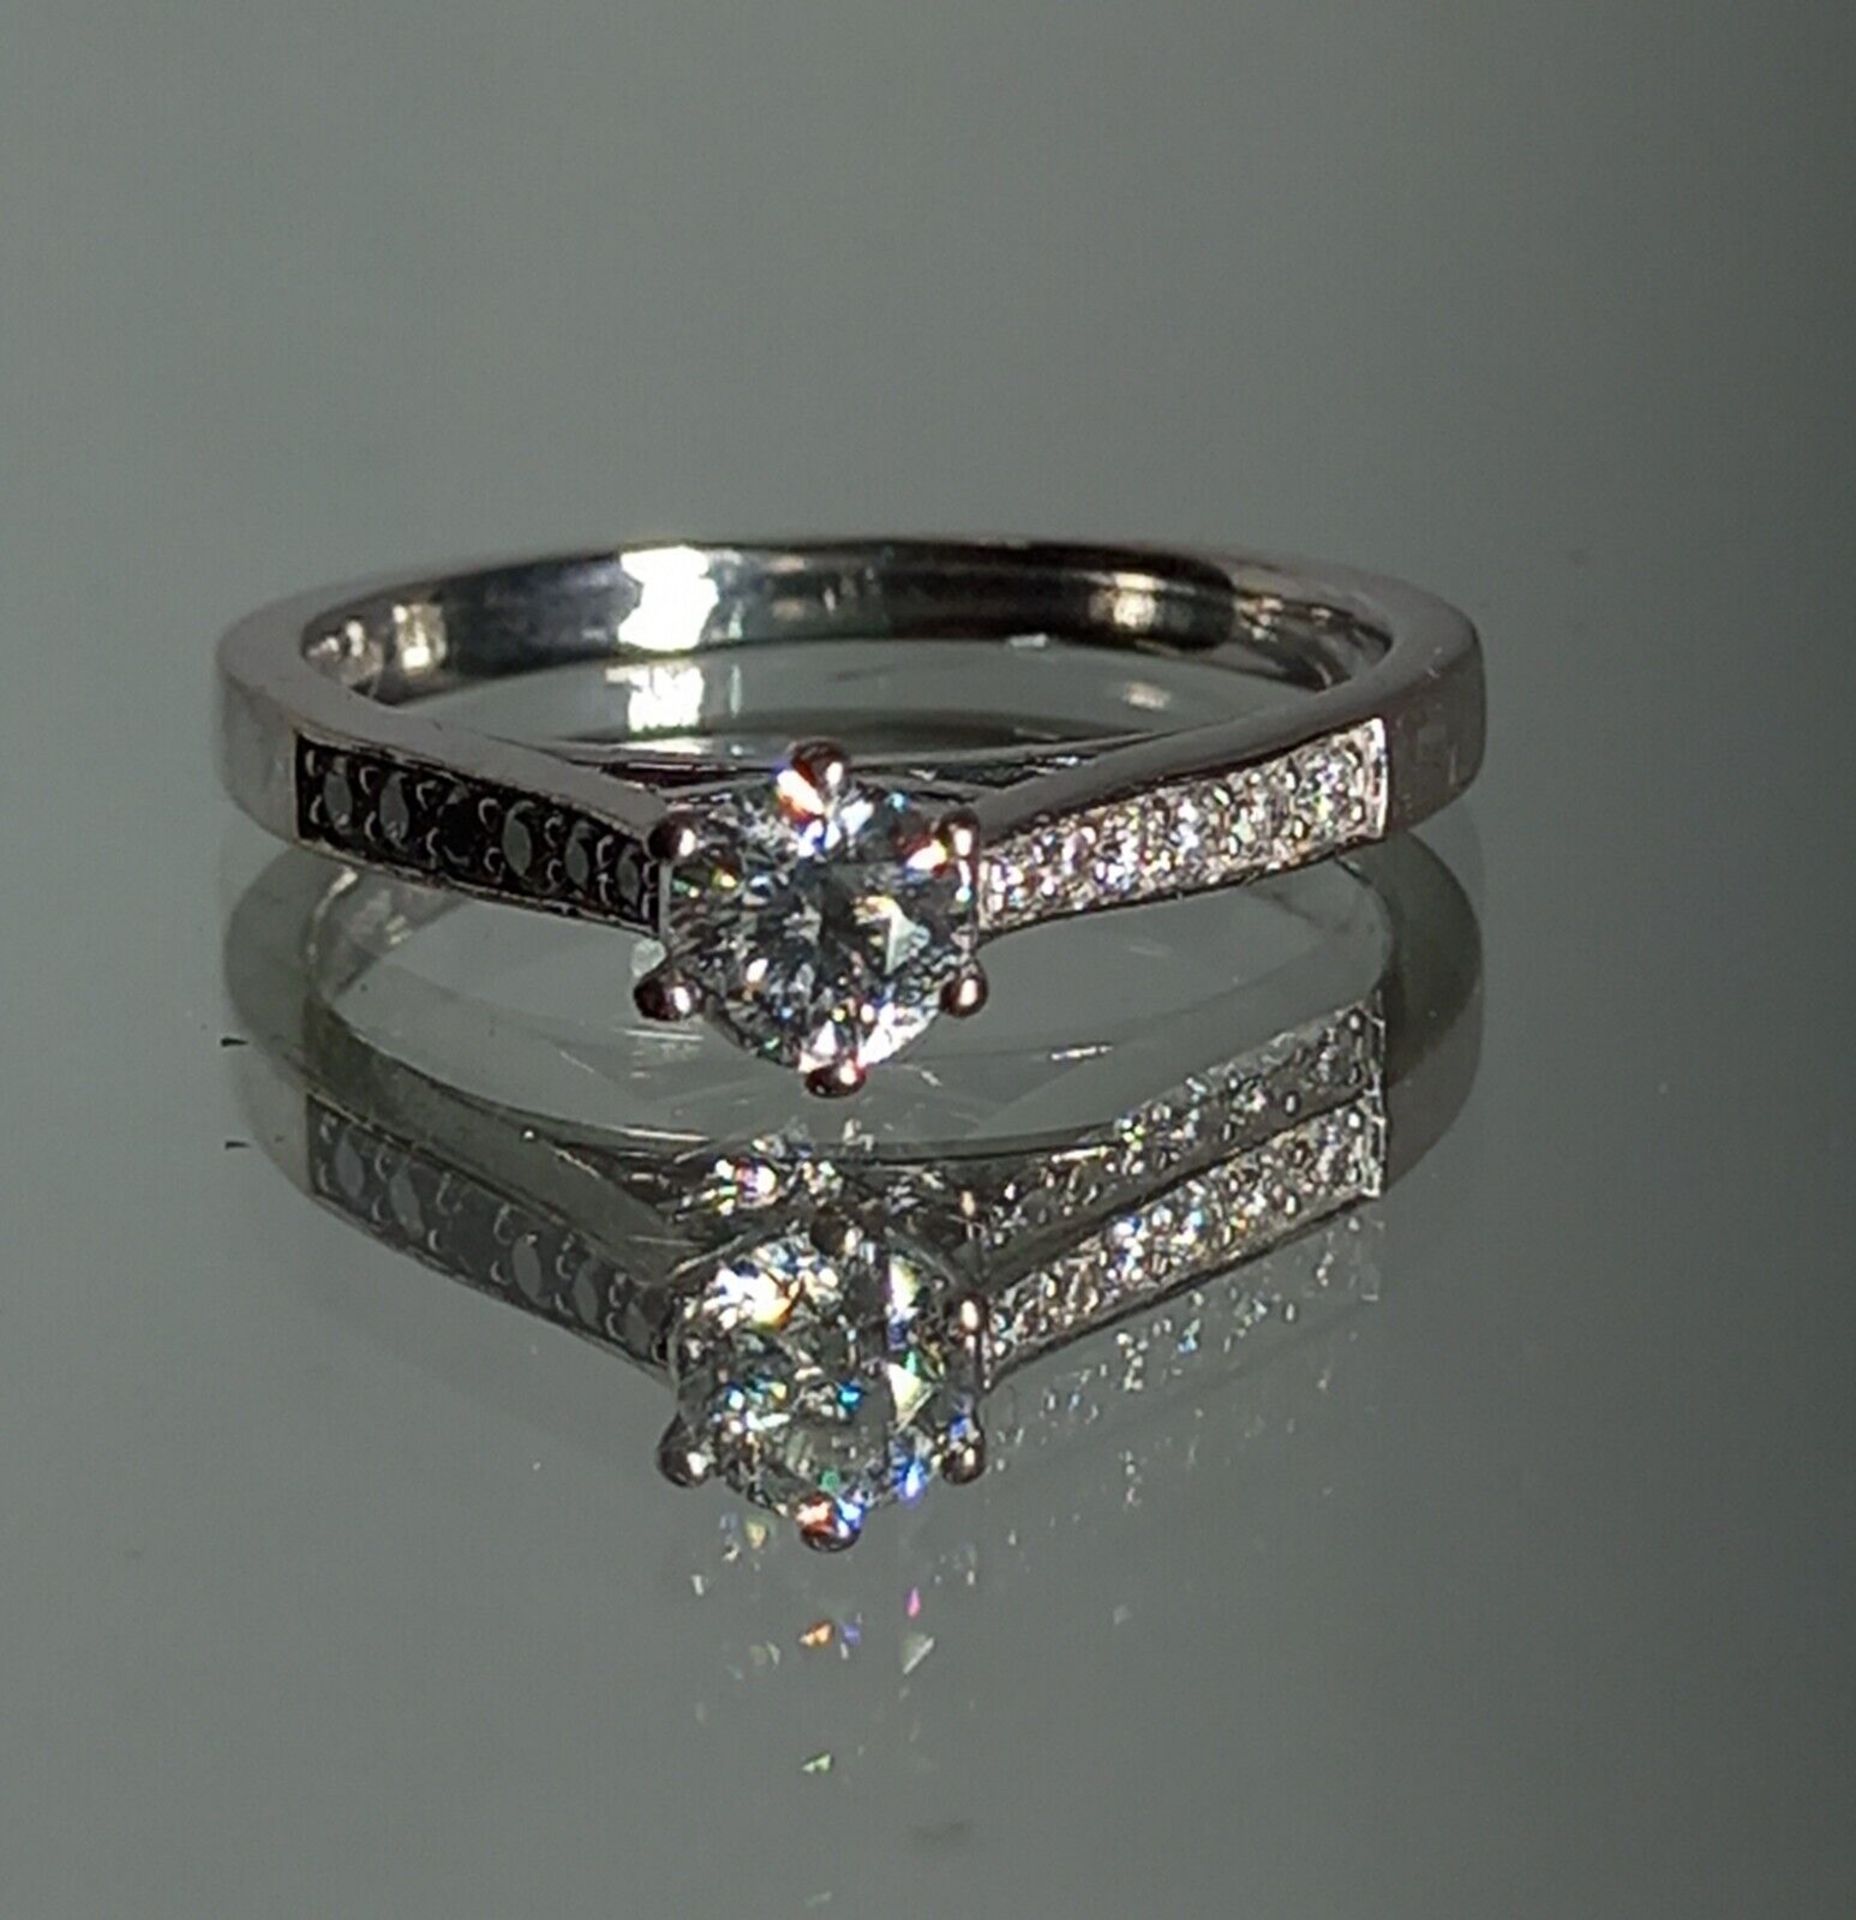 0.35CT DIAMOND ENGAGEMENT RING DIAMOND SHOULDERS IN GIFT BOX WITH VALUATION CERTIFICATE OF £1750 - Image 3 of 5